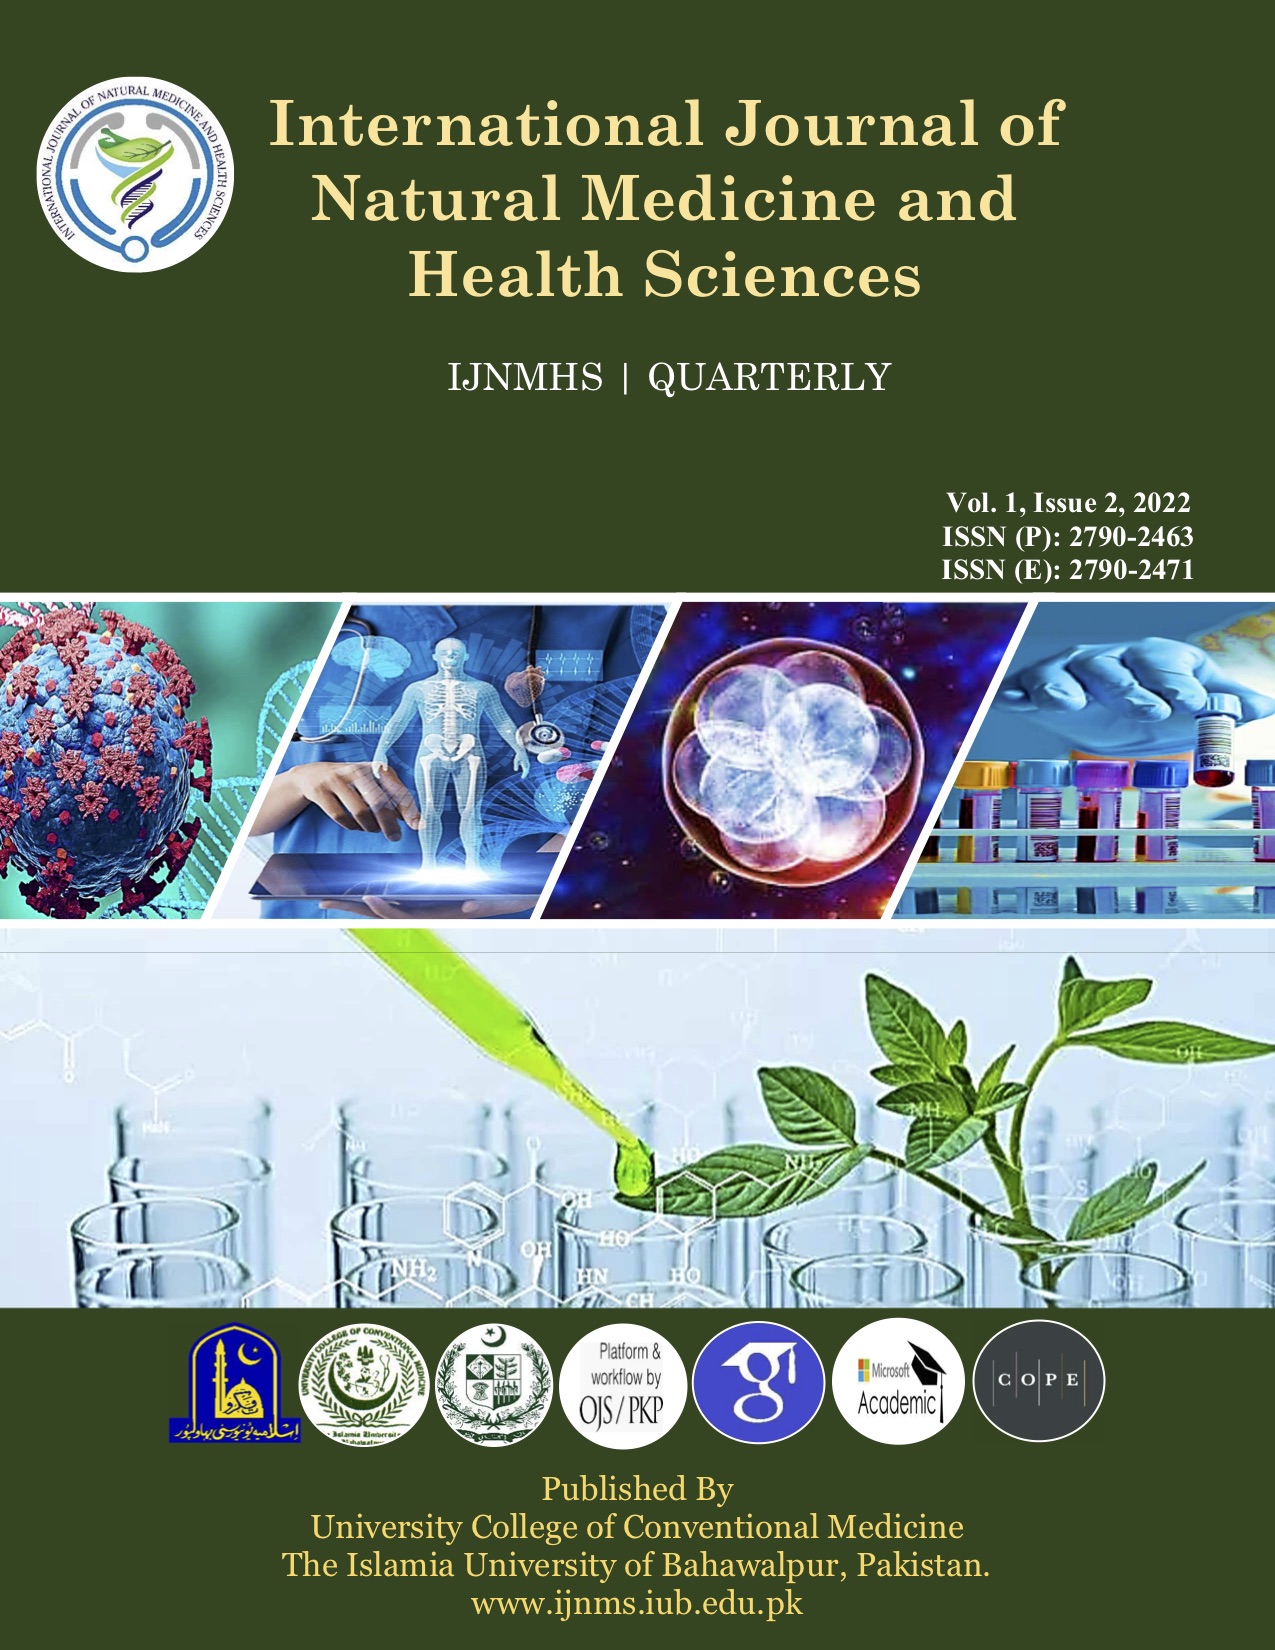 					View Vol. 1 No. 2 (2022): International Journal of Natural Medicine and Health Sciences
				